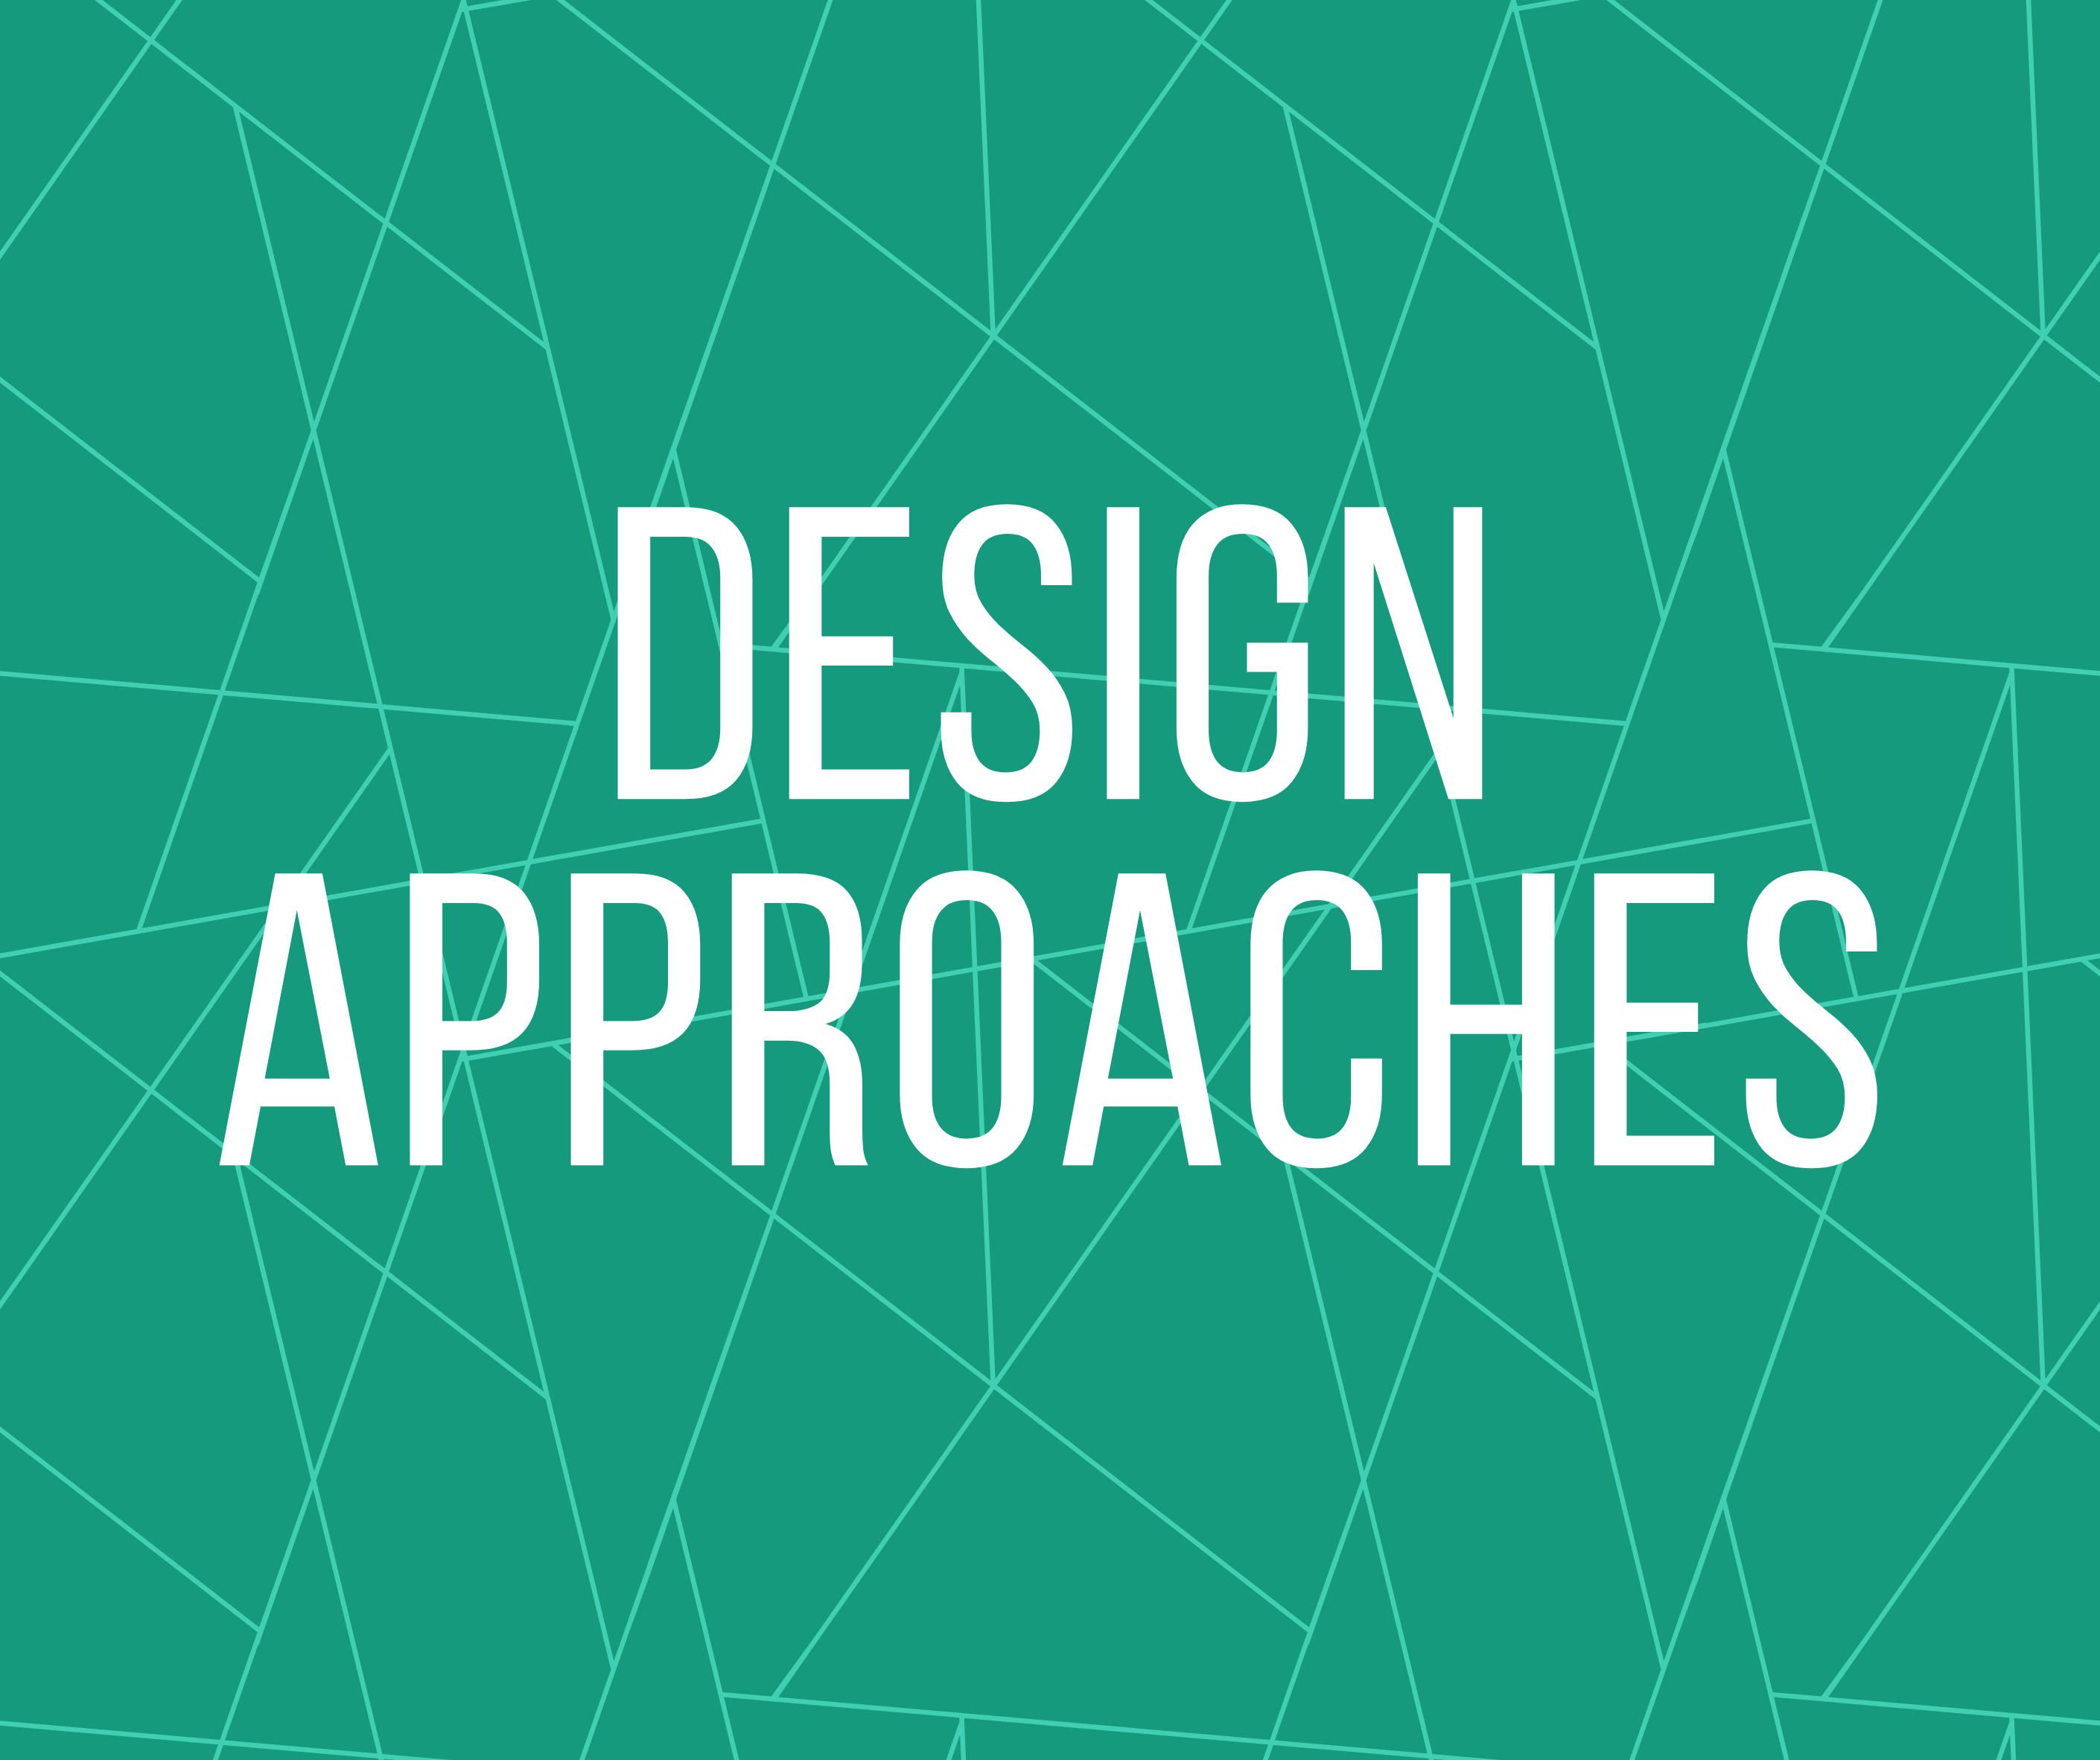 3 Design Approaches Used to Keep Disabilities in Mind: Universal Design, Inclusive Design, and Accessibility